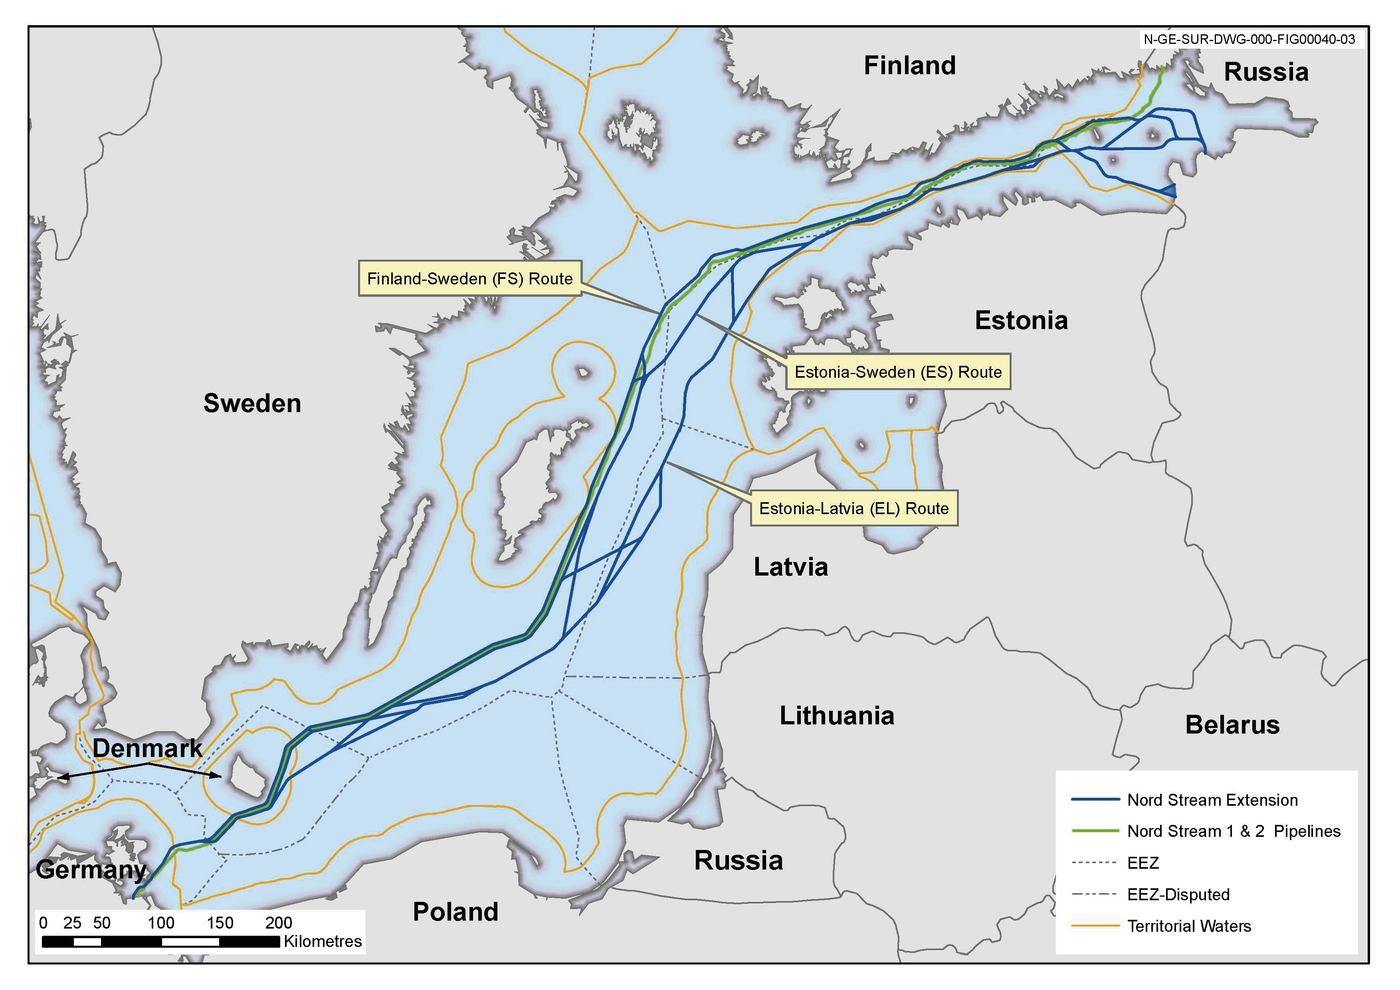 nord stream 1 and 2 plus planned extensions